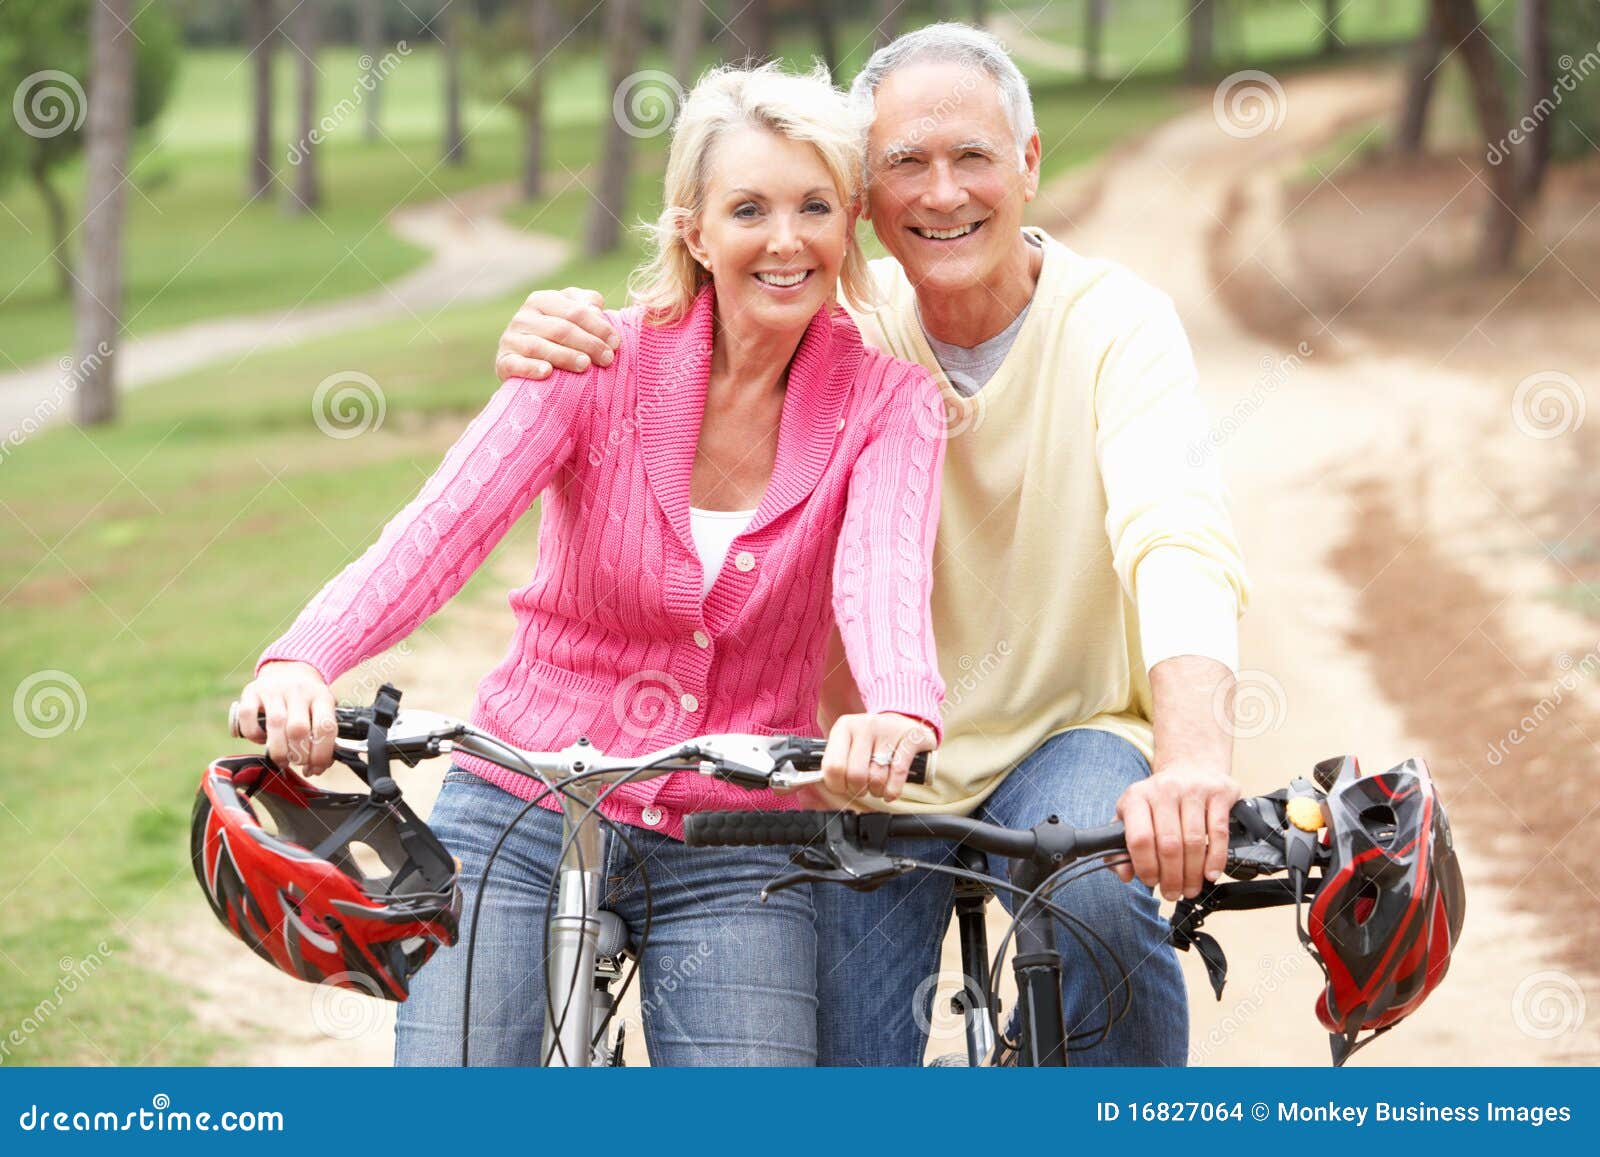 senior couple riding bicycle in park